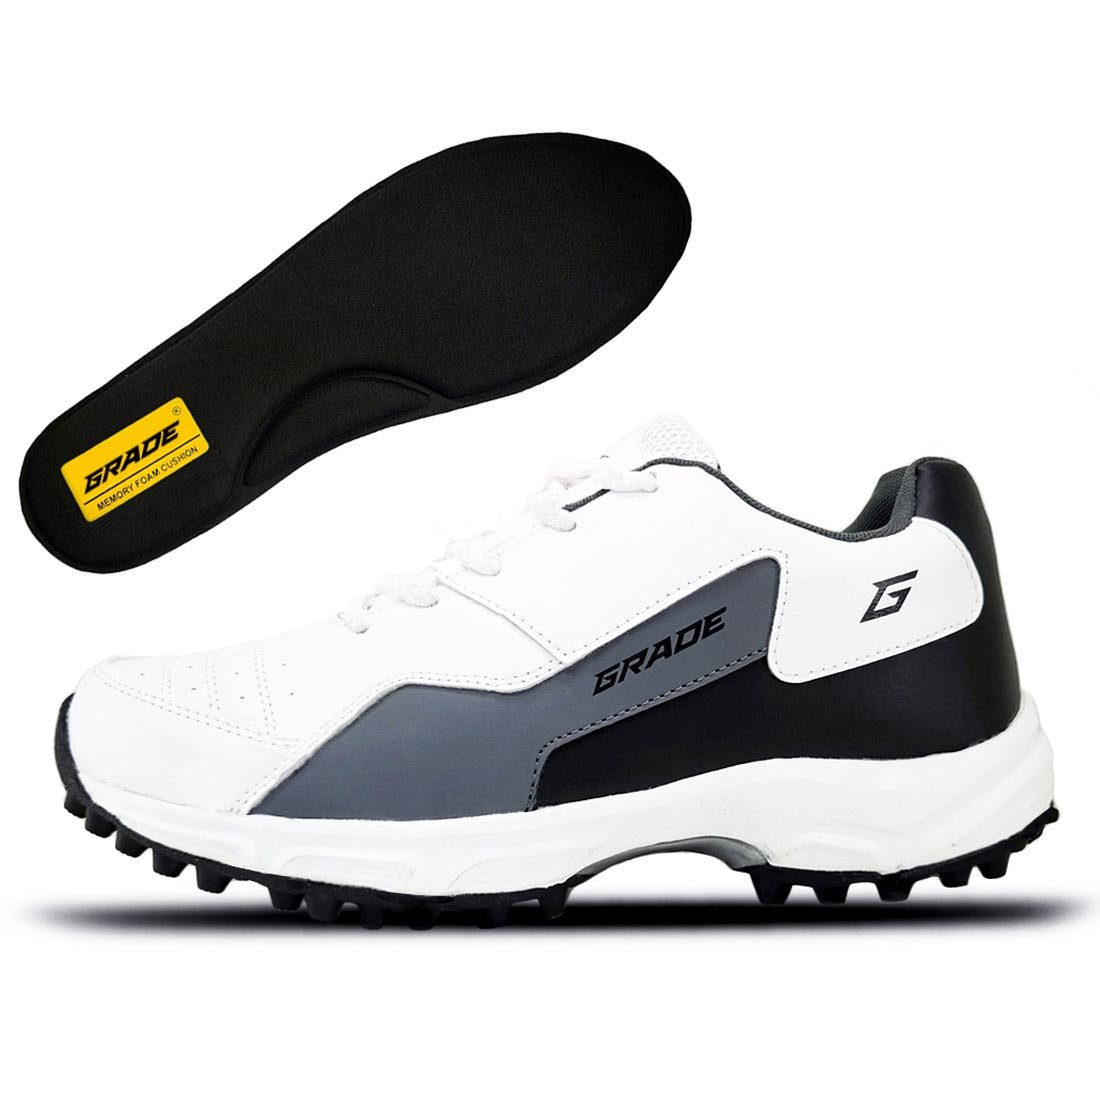 STRAIGHT DRIVE Memory Foam Cricket Shoes Full Rubber Spikes